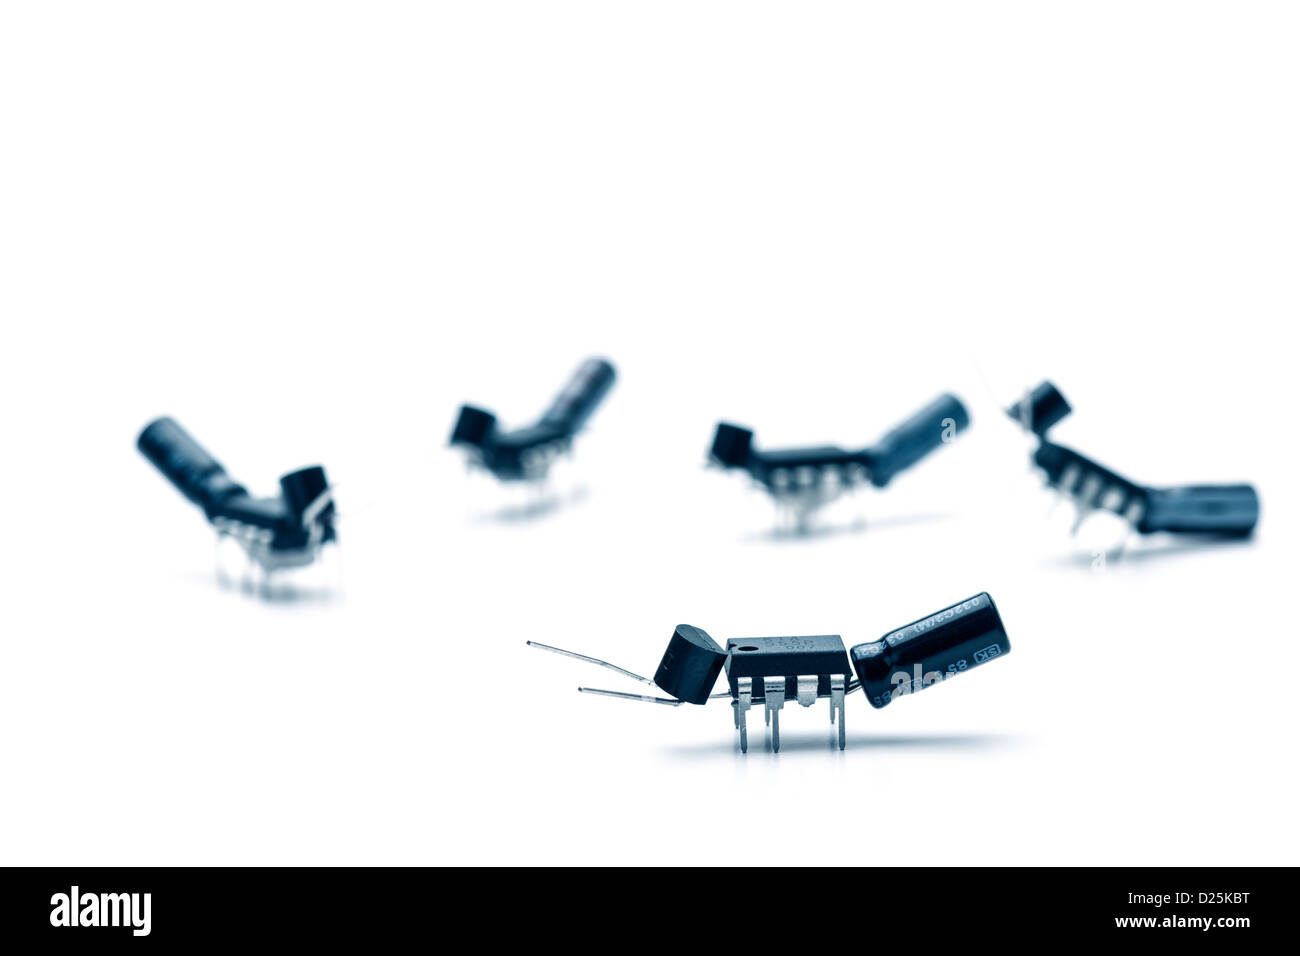 Ants / bugs made out of microchips and other electronic parts Stock Photo